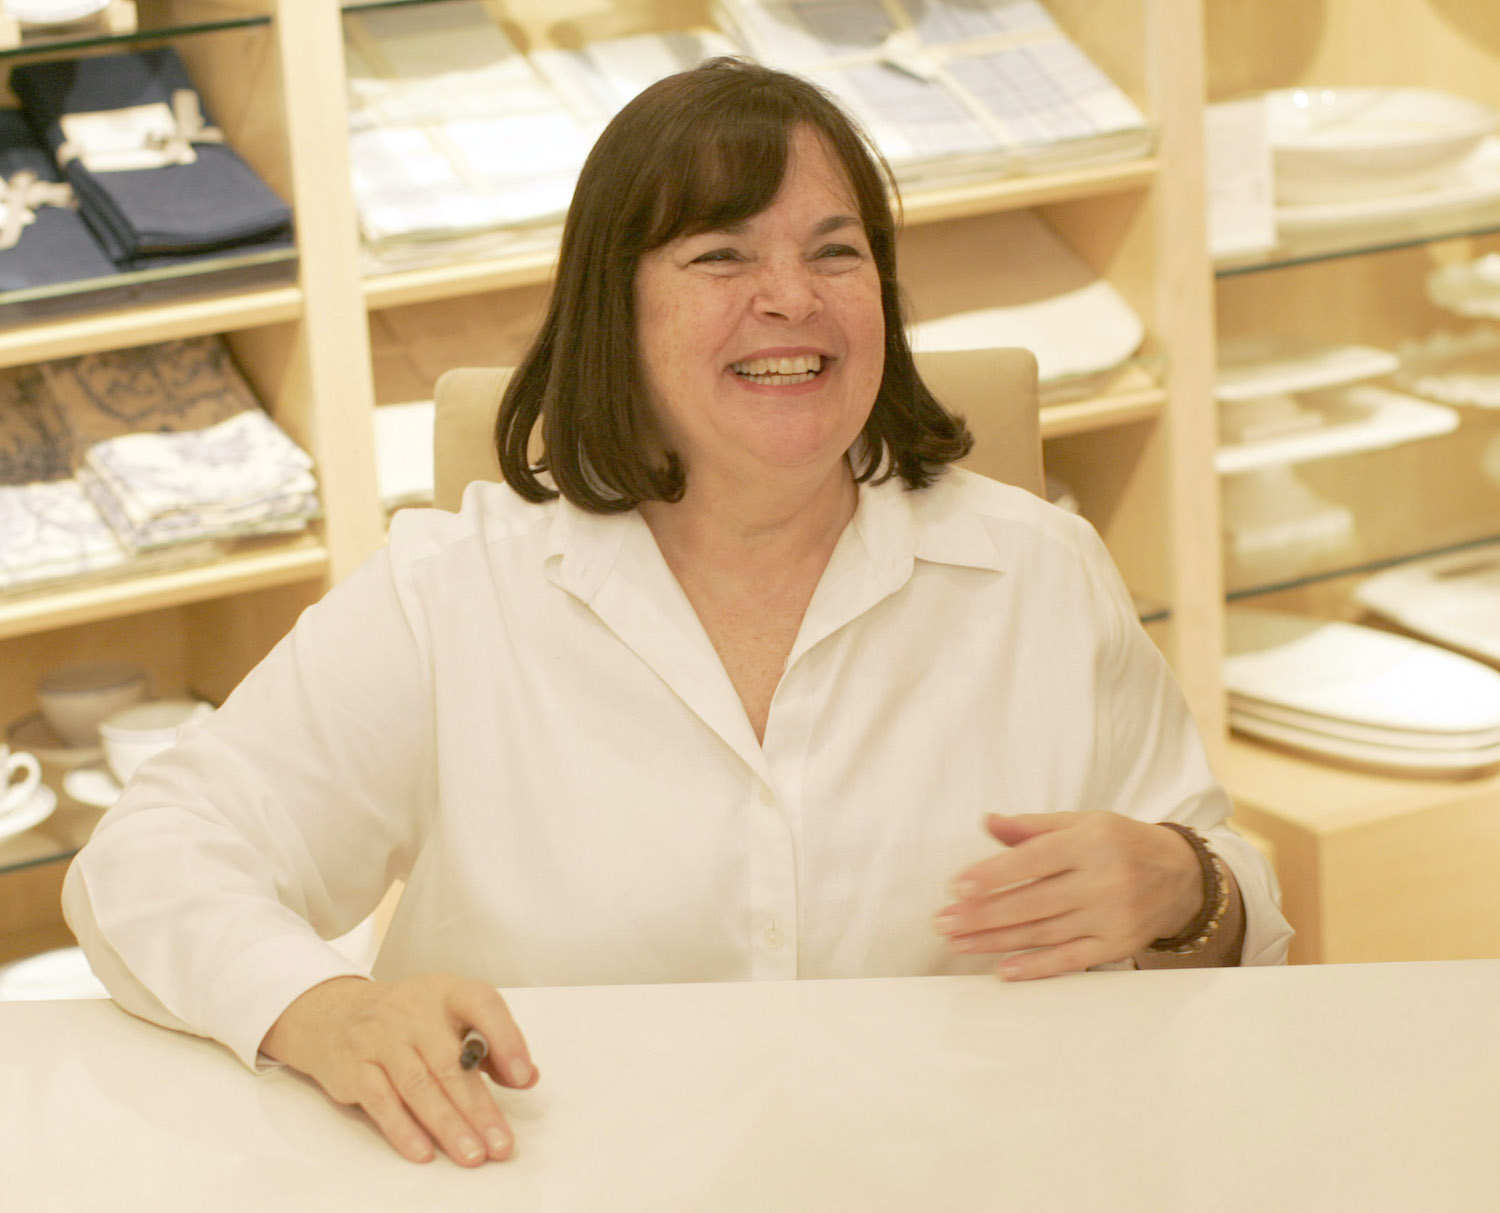 Ina Garten smiles as she sits at a table during a book signing at William Sonoma